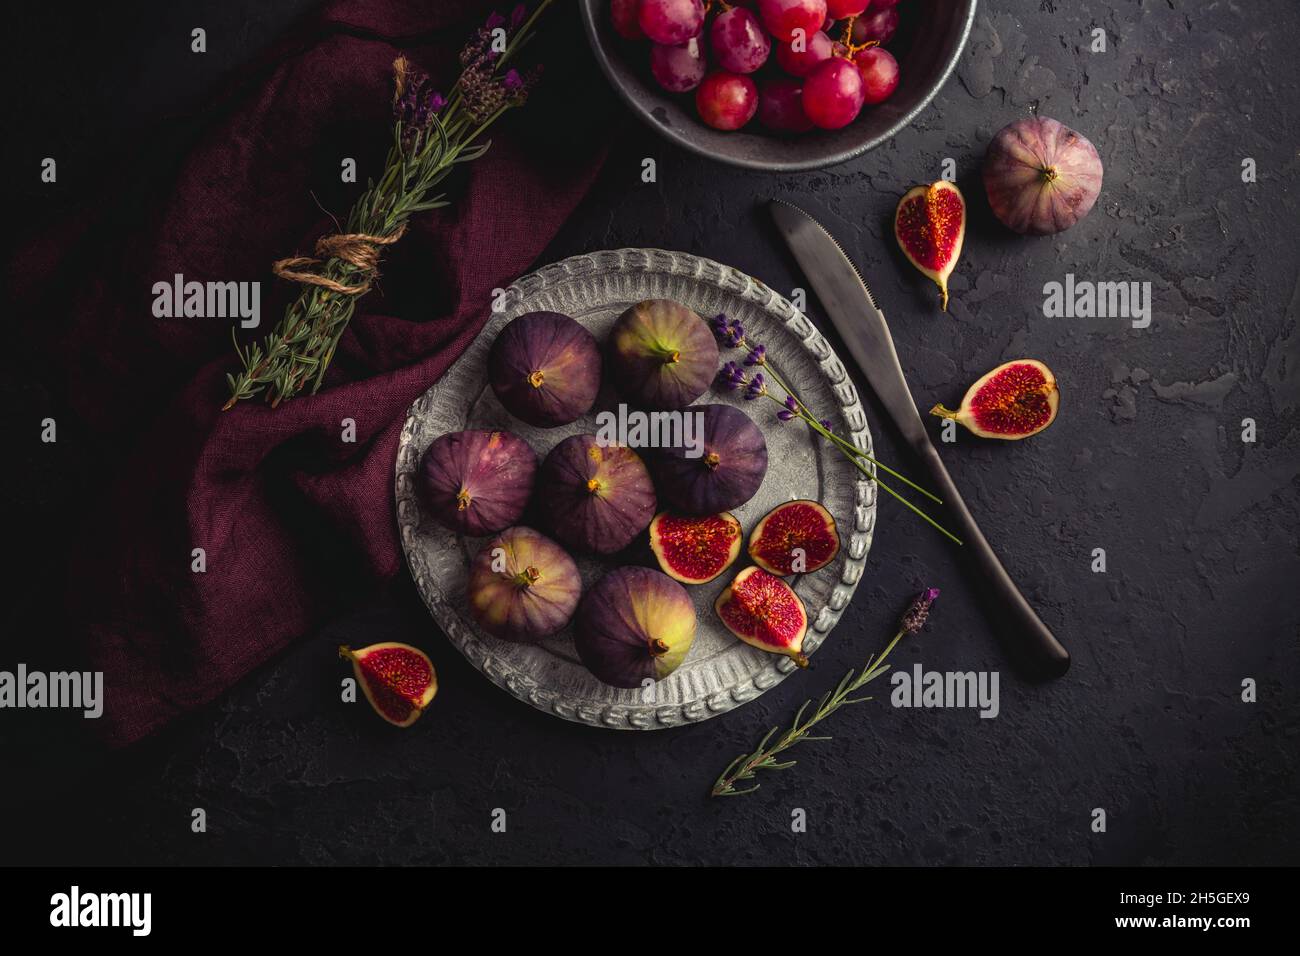 Organic fresh figs with red grapes and lavender on dark background Stock Photo